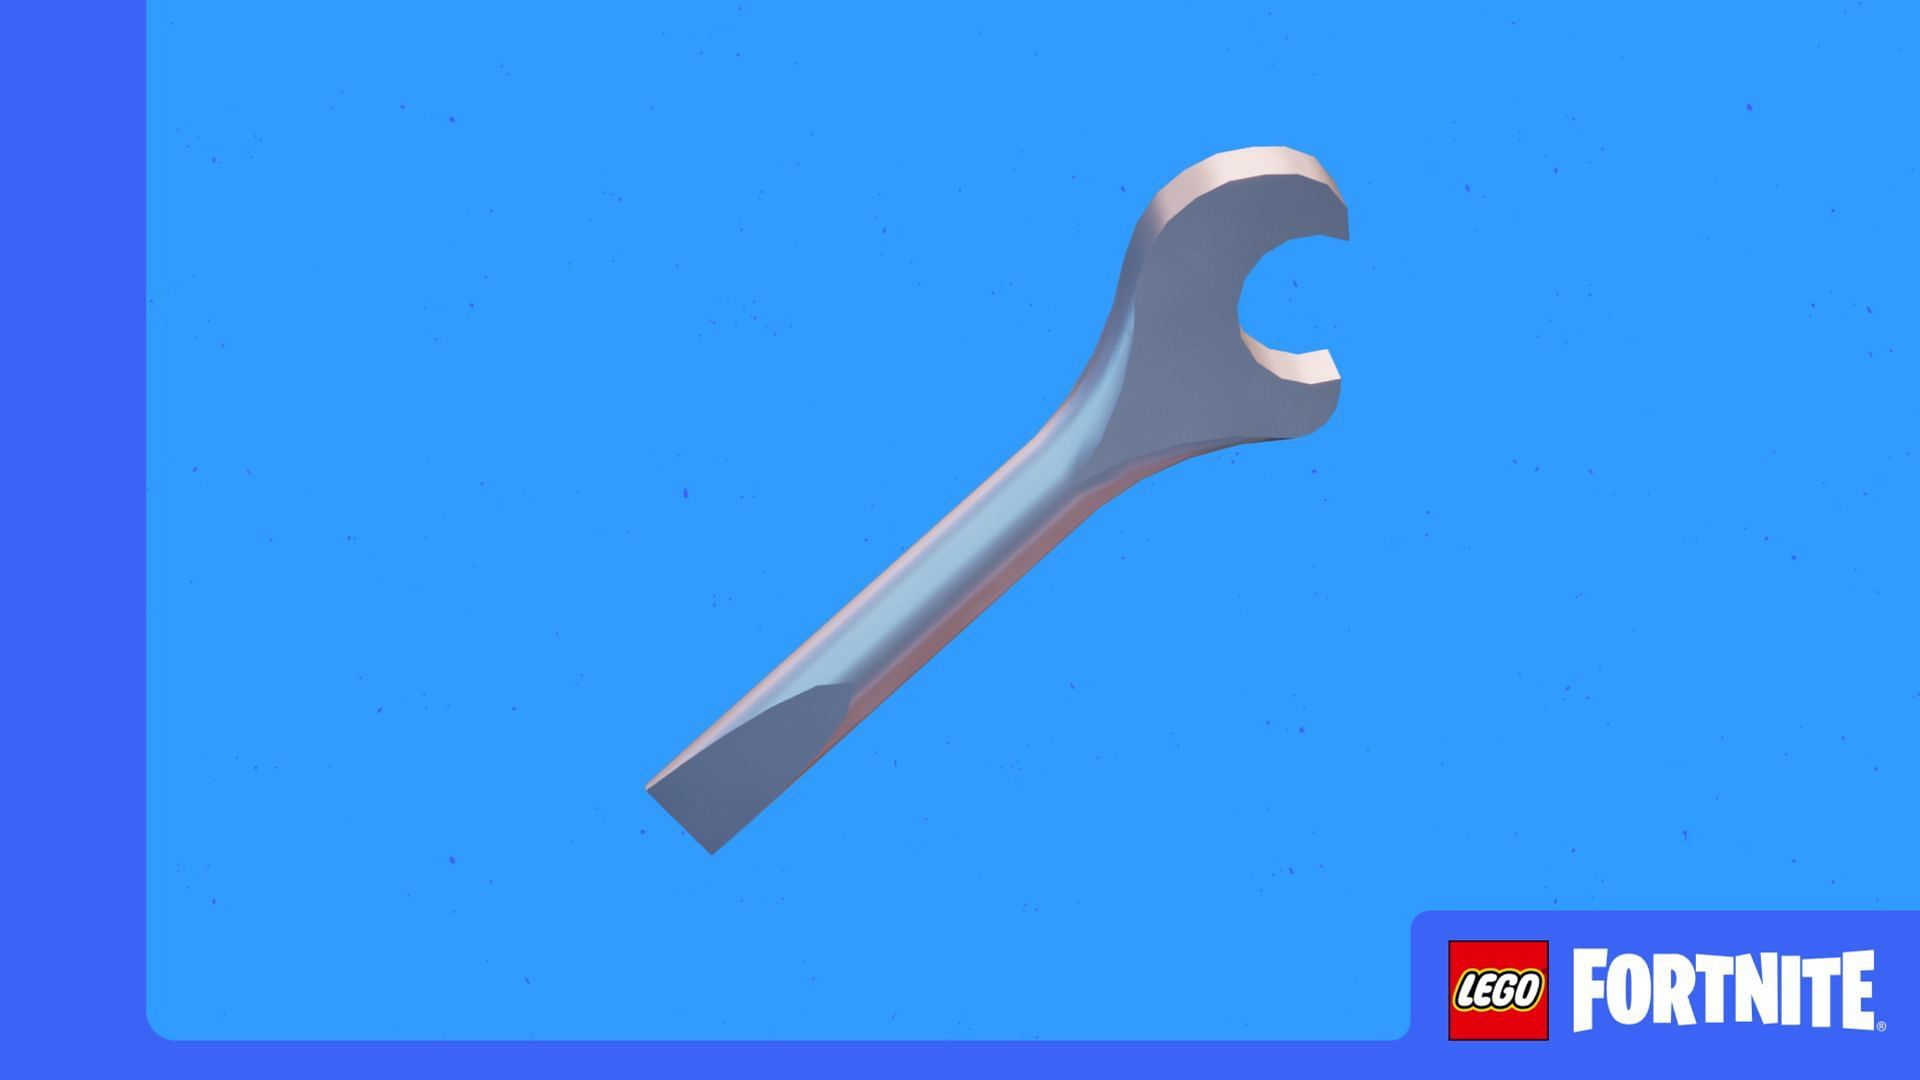 With the help of a Wooden Rod, you can craft a Wrench in LEGO Fortnite (Image via EPIC Games)